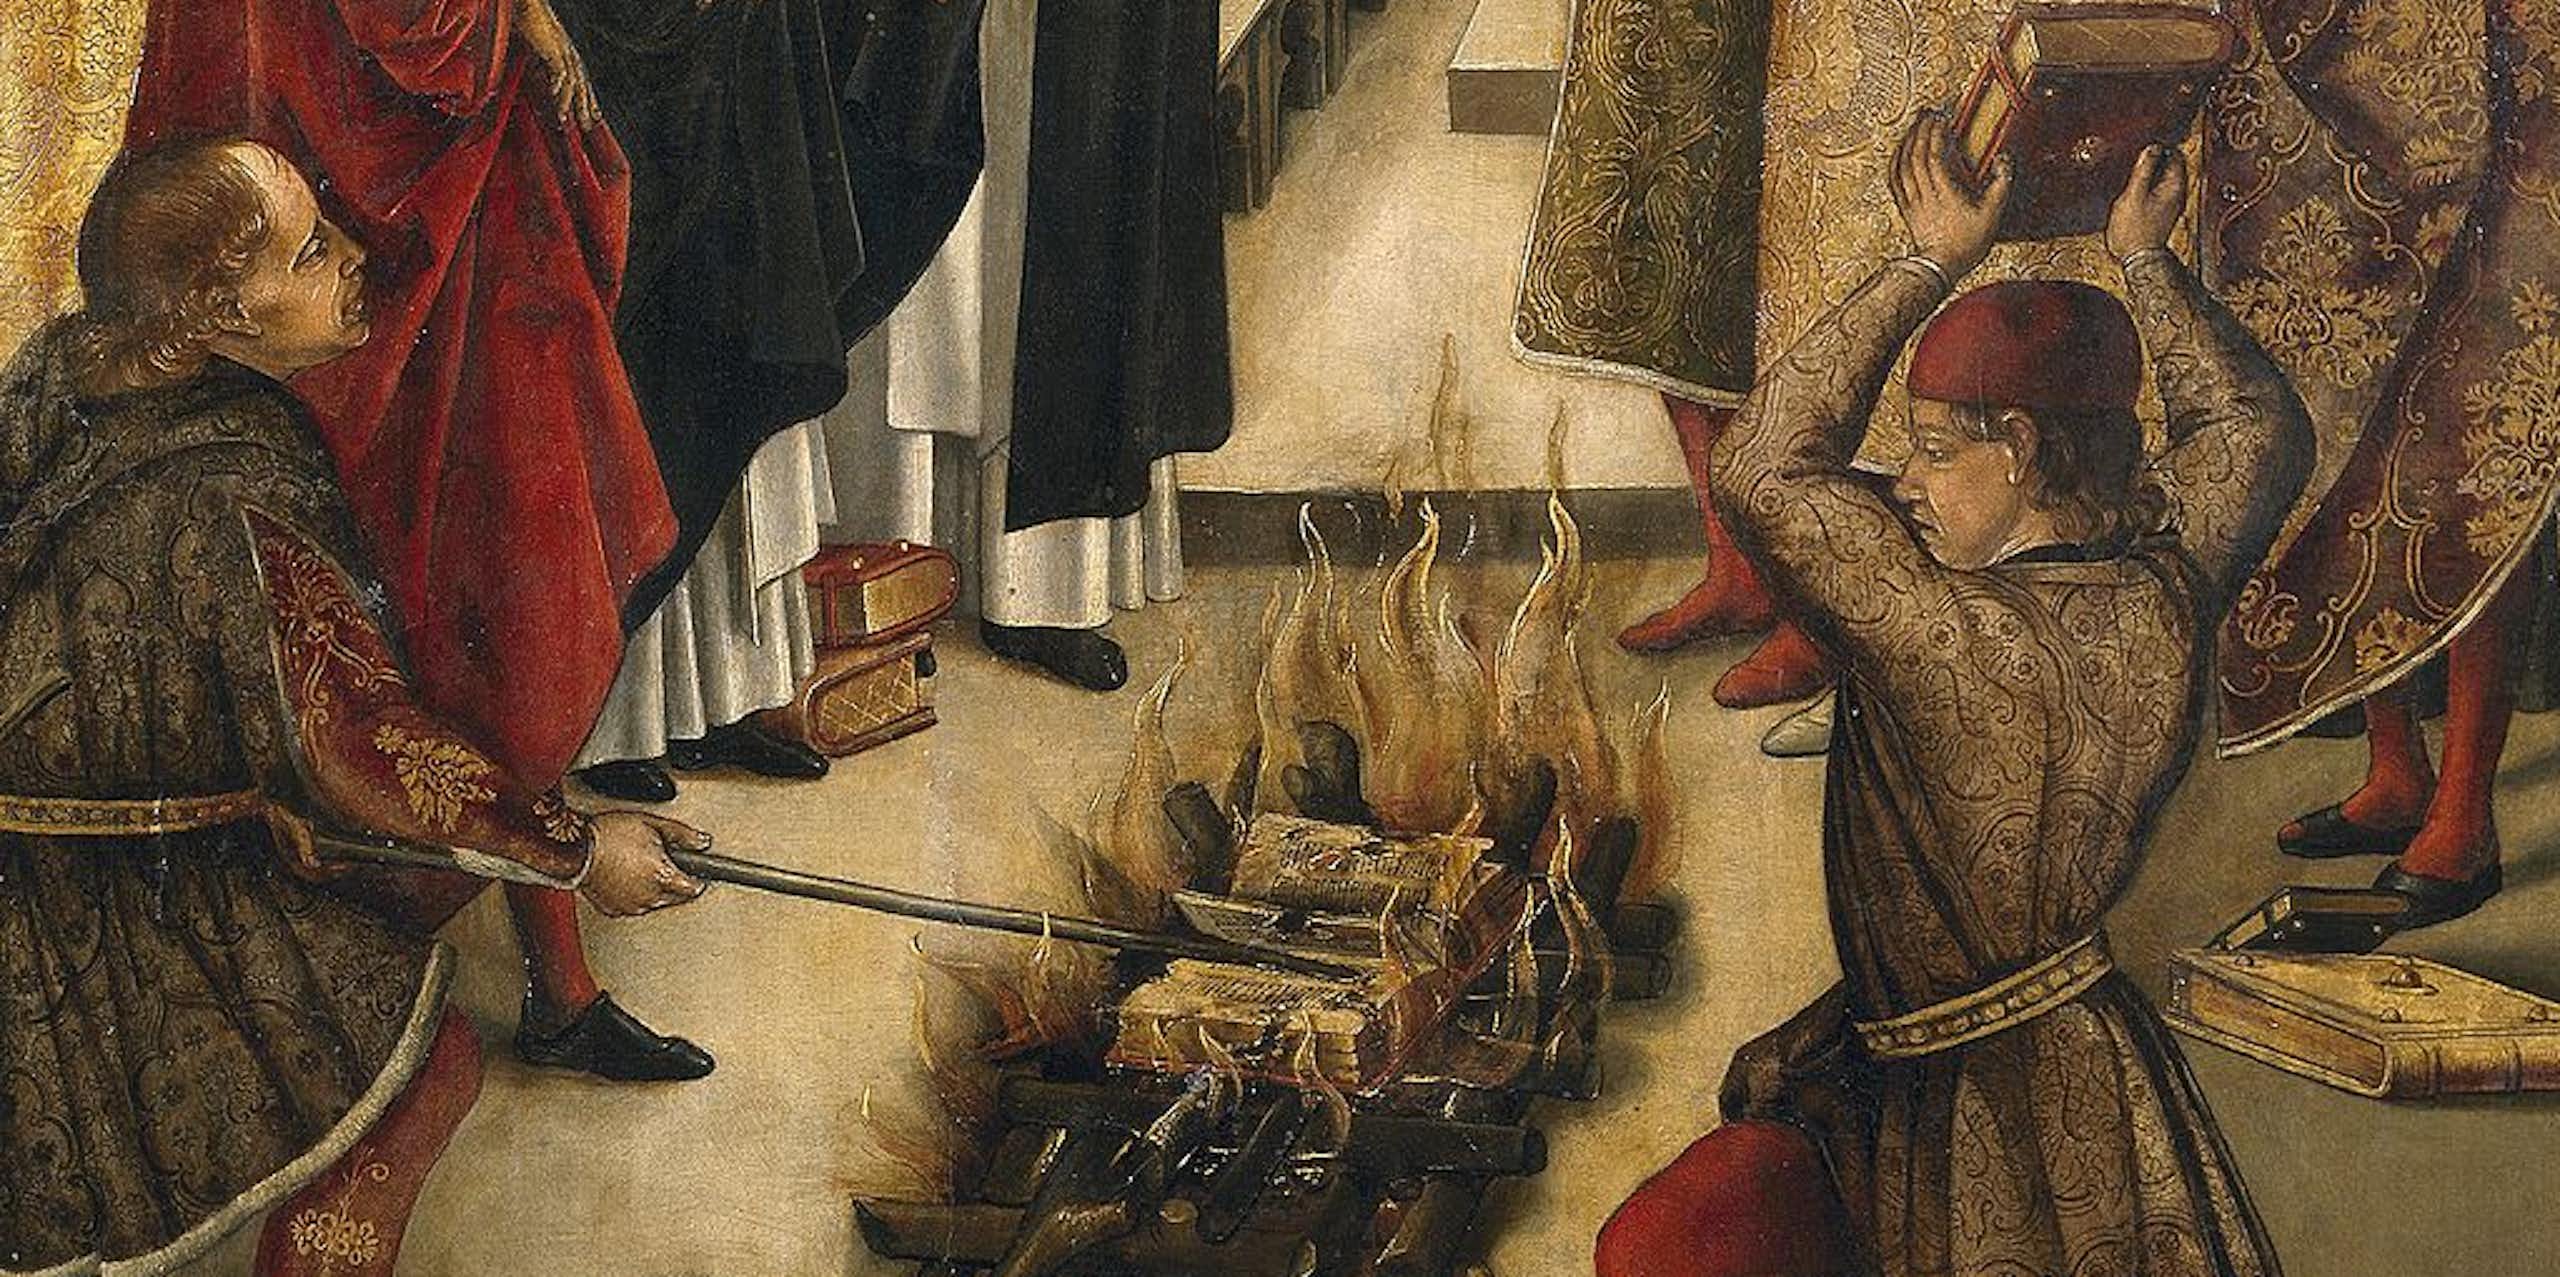 A faded painting shows two men in medieval clothing casting books into a small fire.